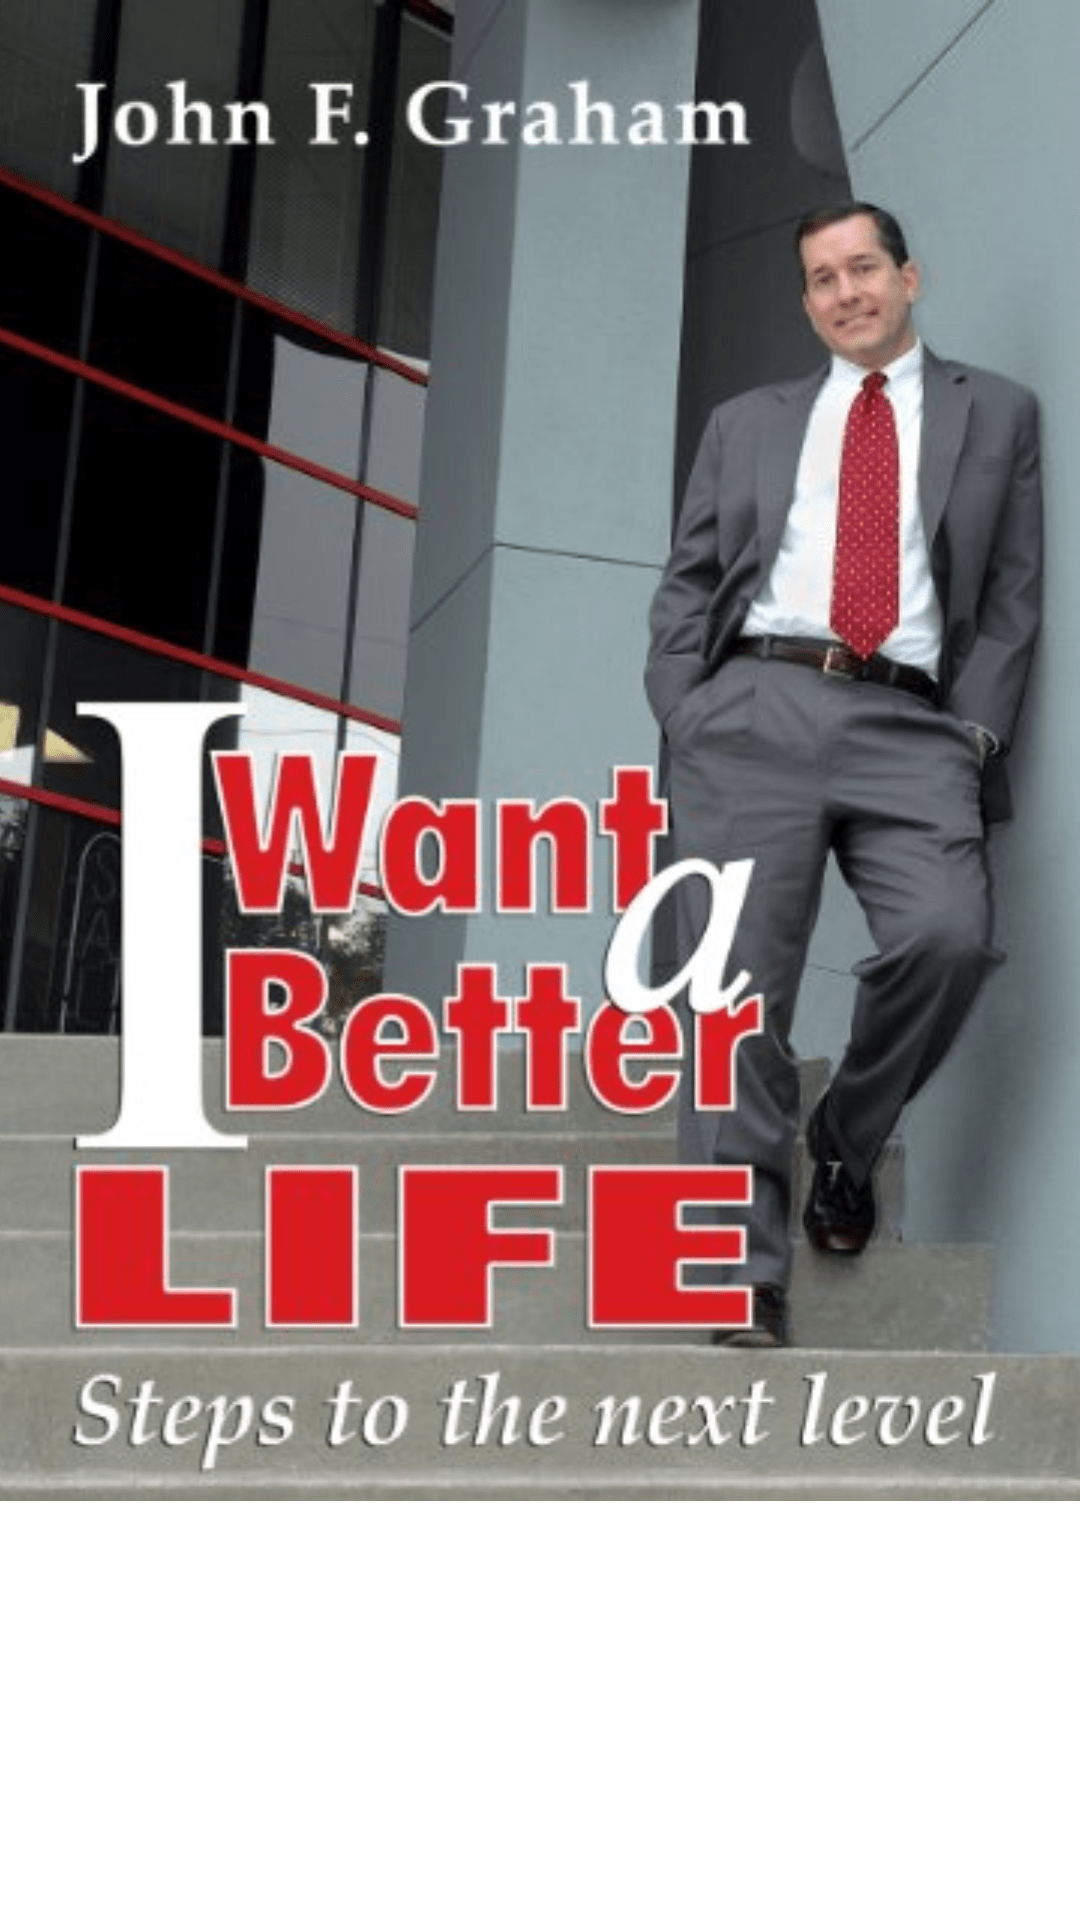 I Want a Better Life, Steps to the Next Level